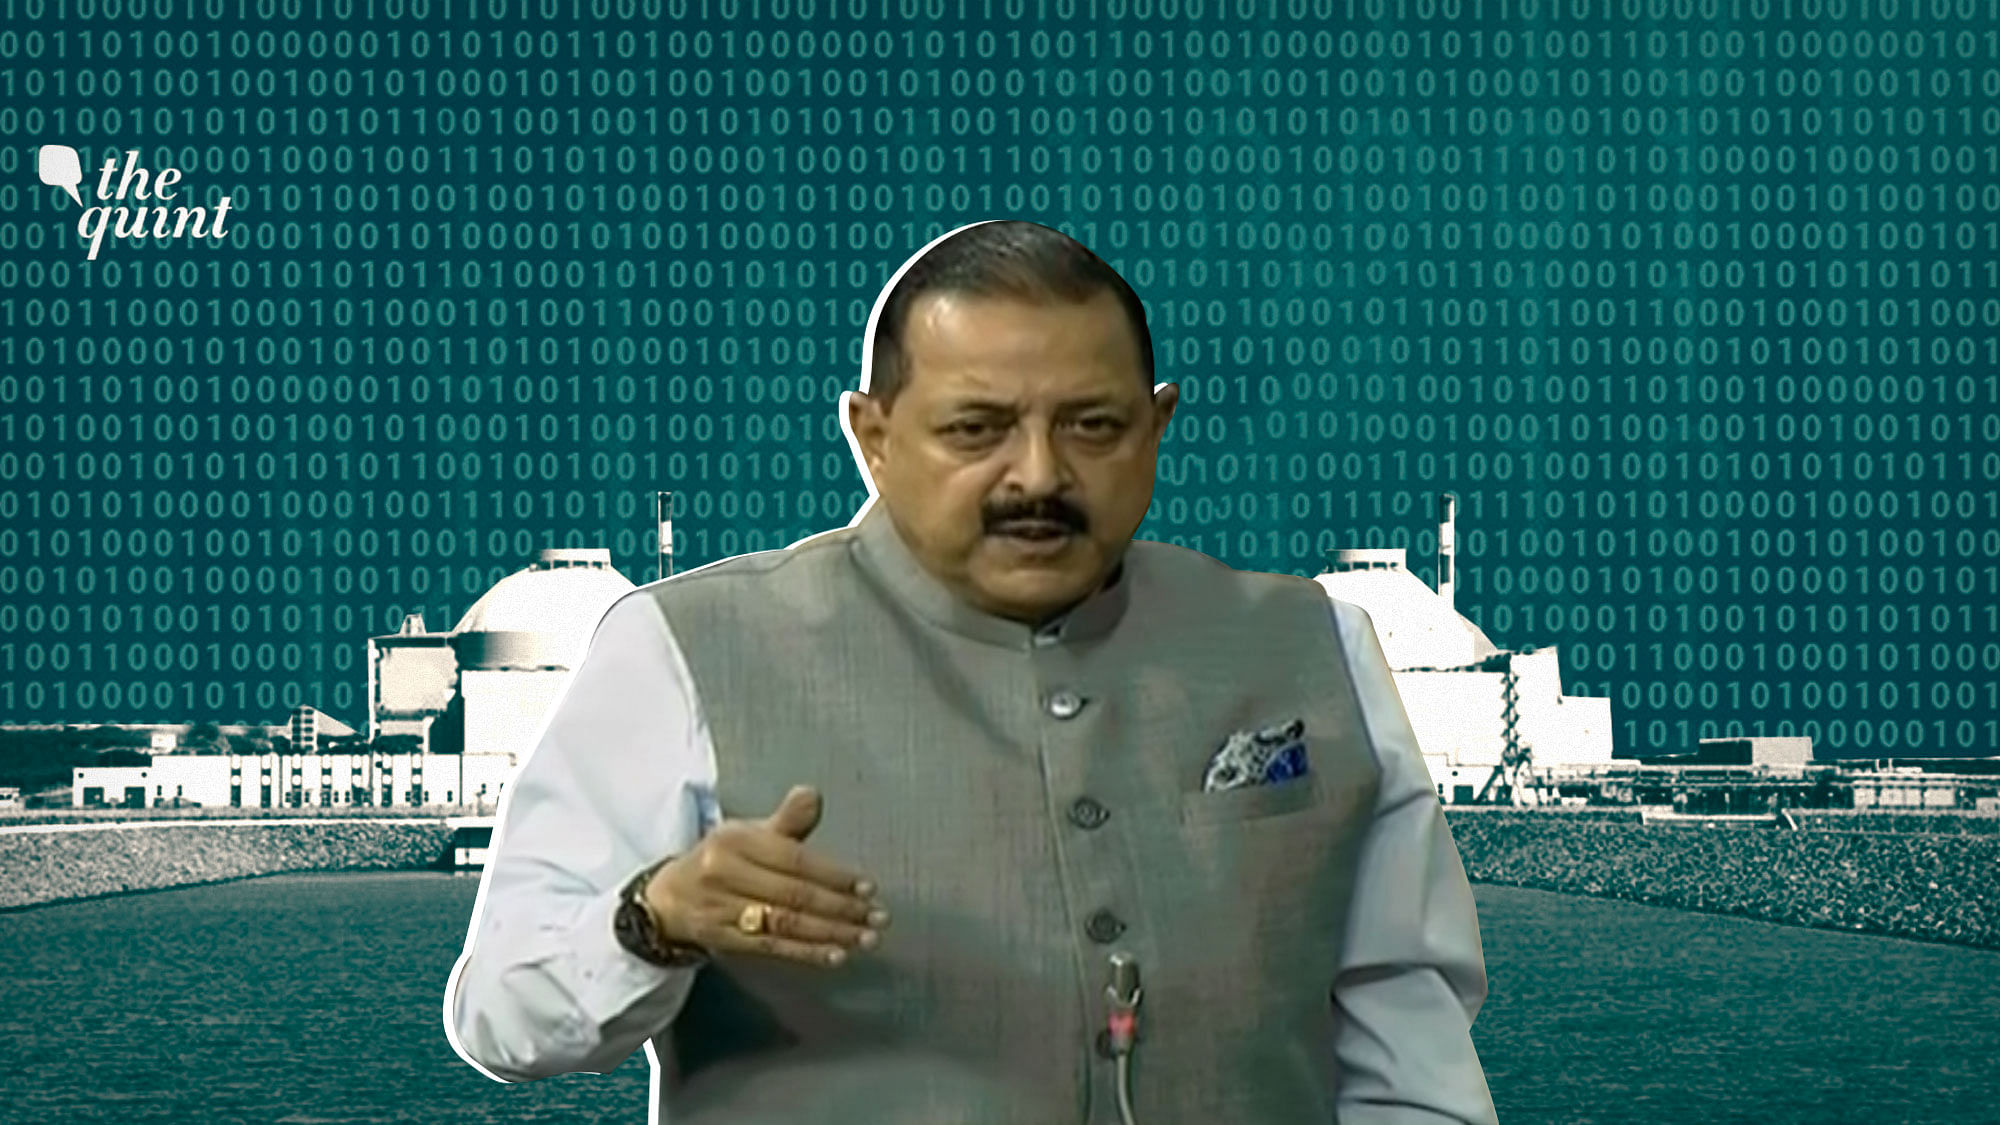 Three weeks after a cyber attack on India’s largest nuclear plant in Kudankulam, Tamil Nadu, was confirmed, Jitendra Singh, Minister of State in The Prime Minister’s Office acknowledged the same in Parliament.